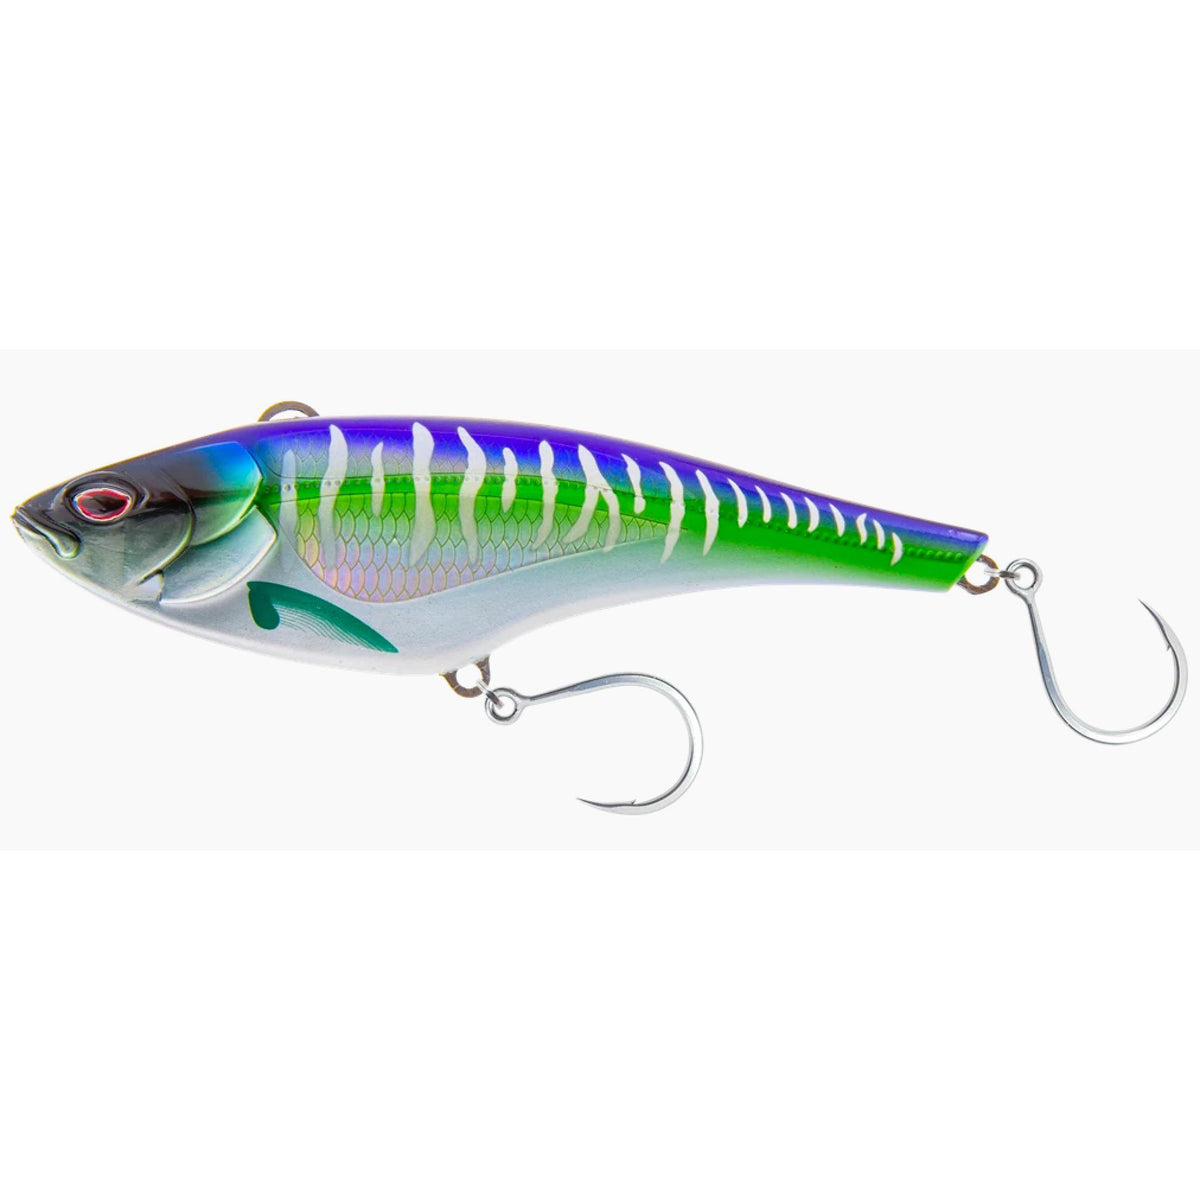 Nomad Tackle DTX Minnow